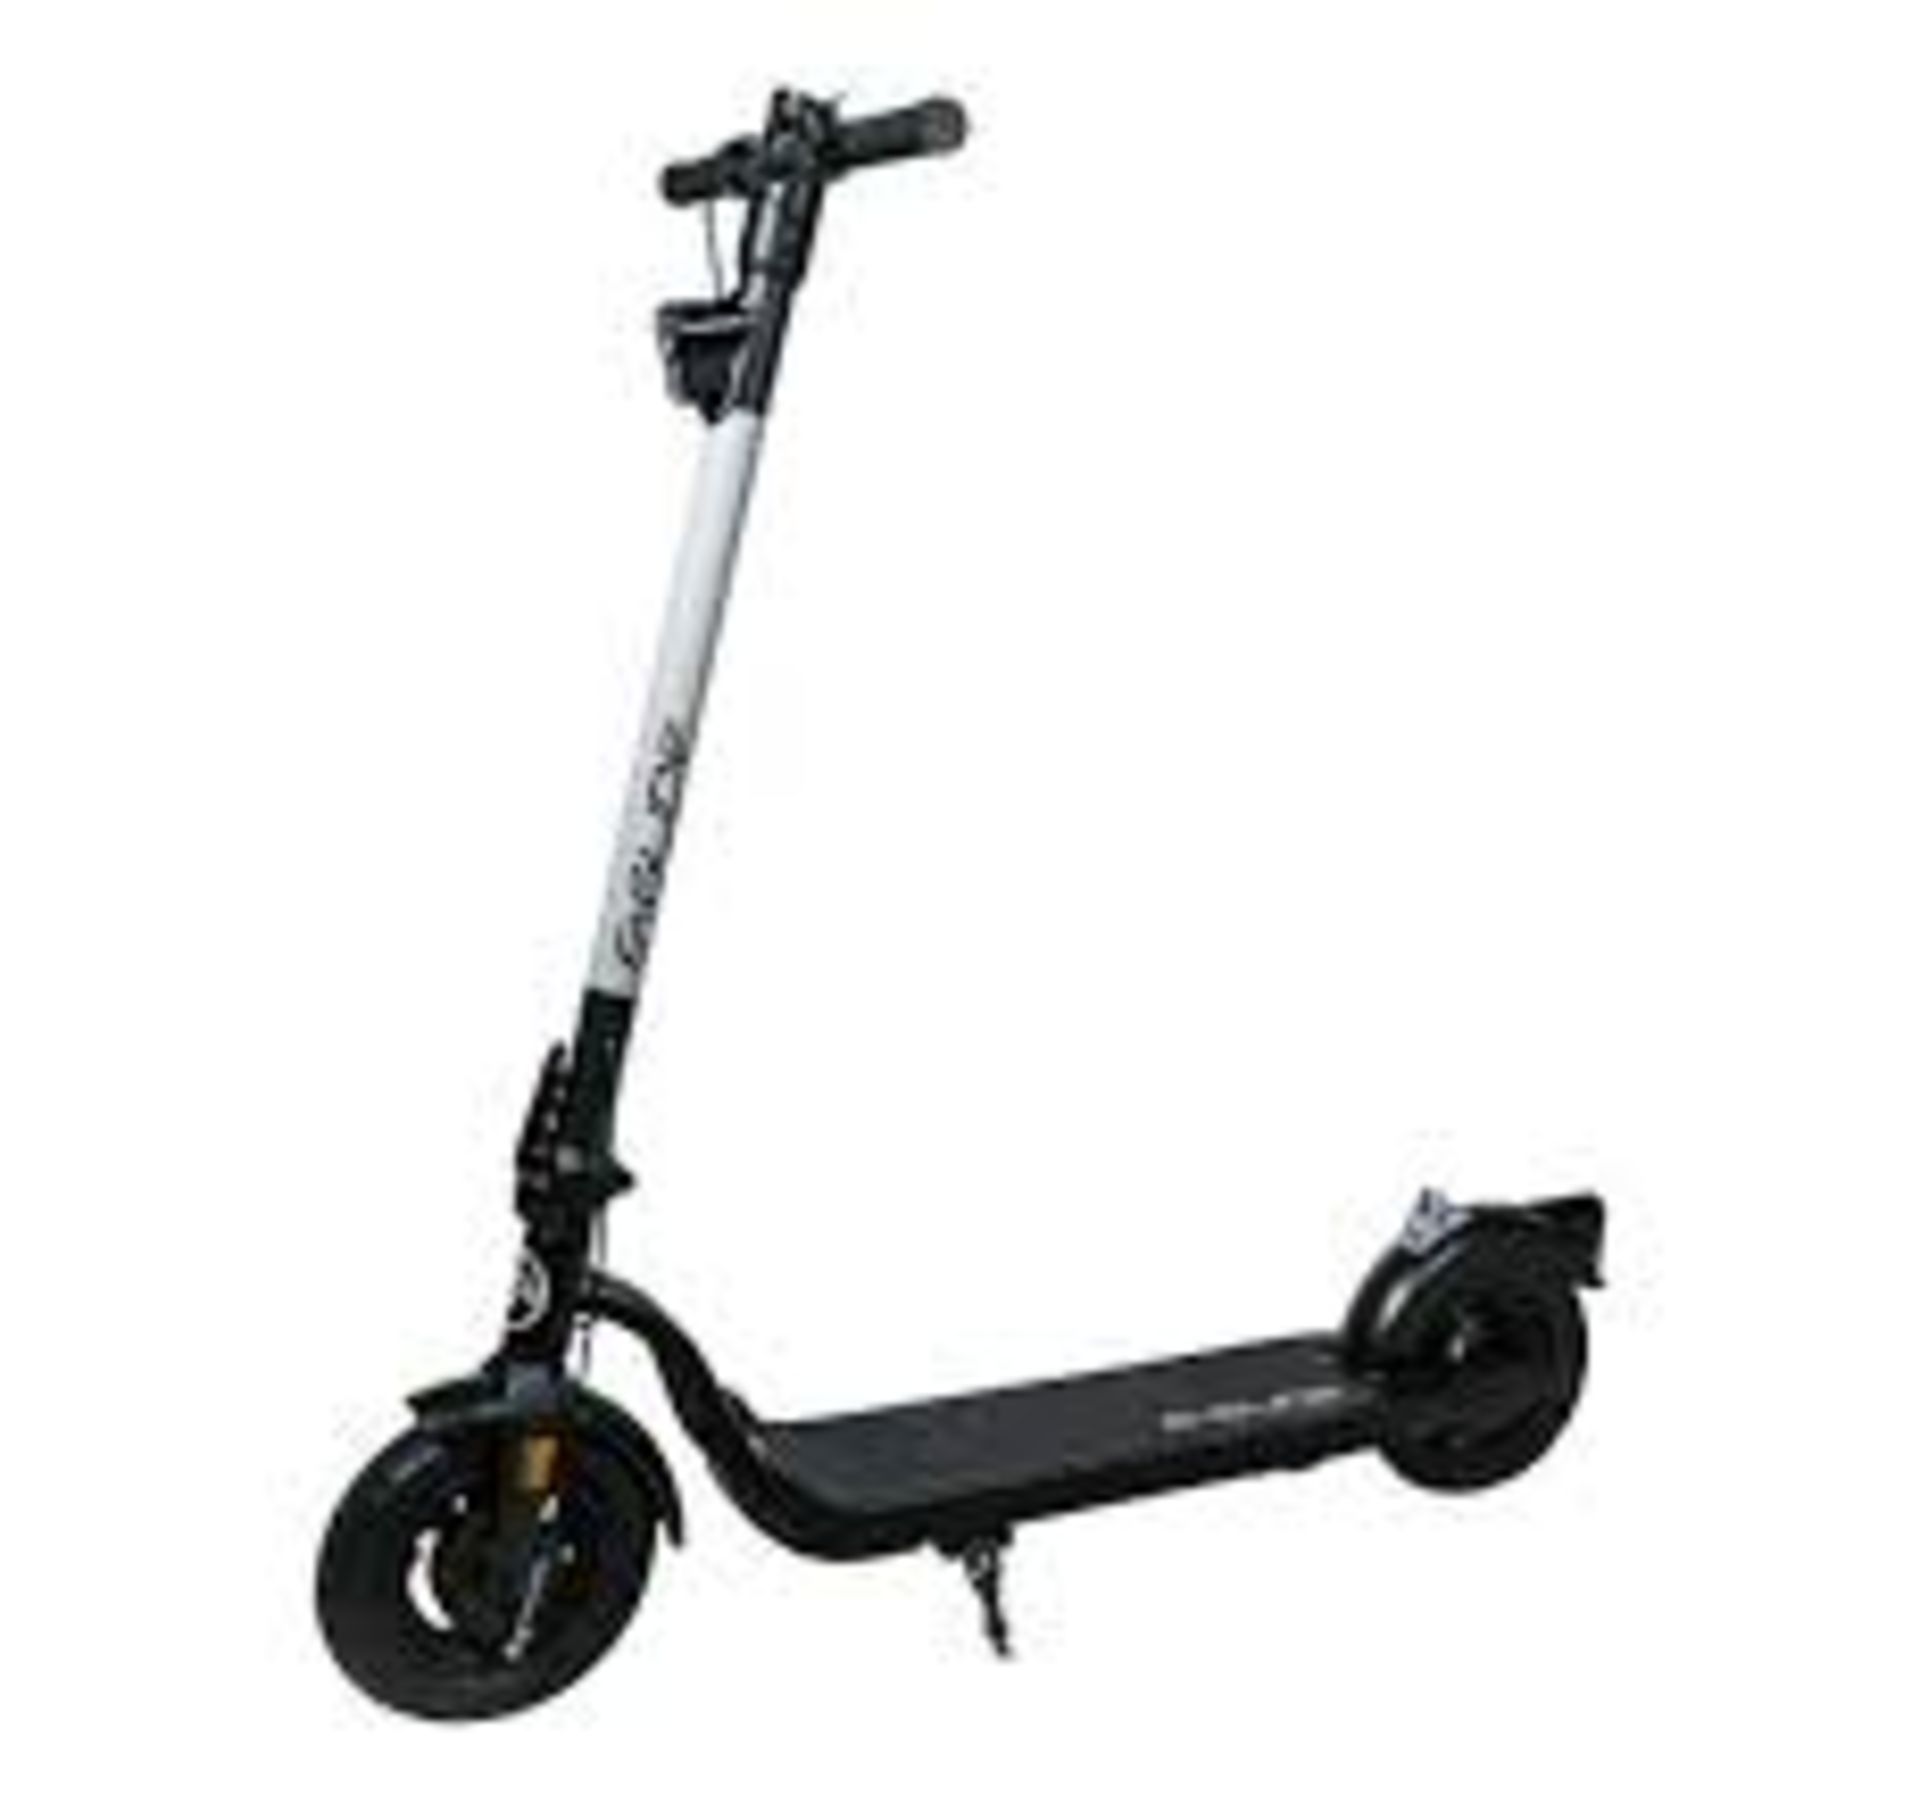 Brand New E-Glide V2 Electric Scooter Orange and Black RRP £599, Introducing a sleek and efficient - Image 3 of 3